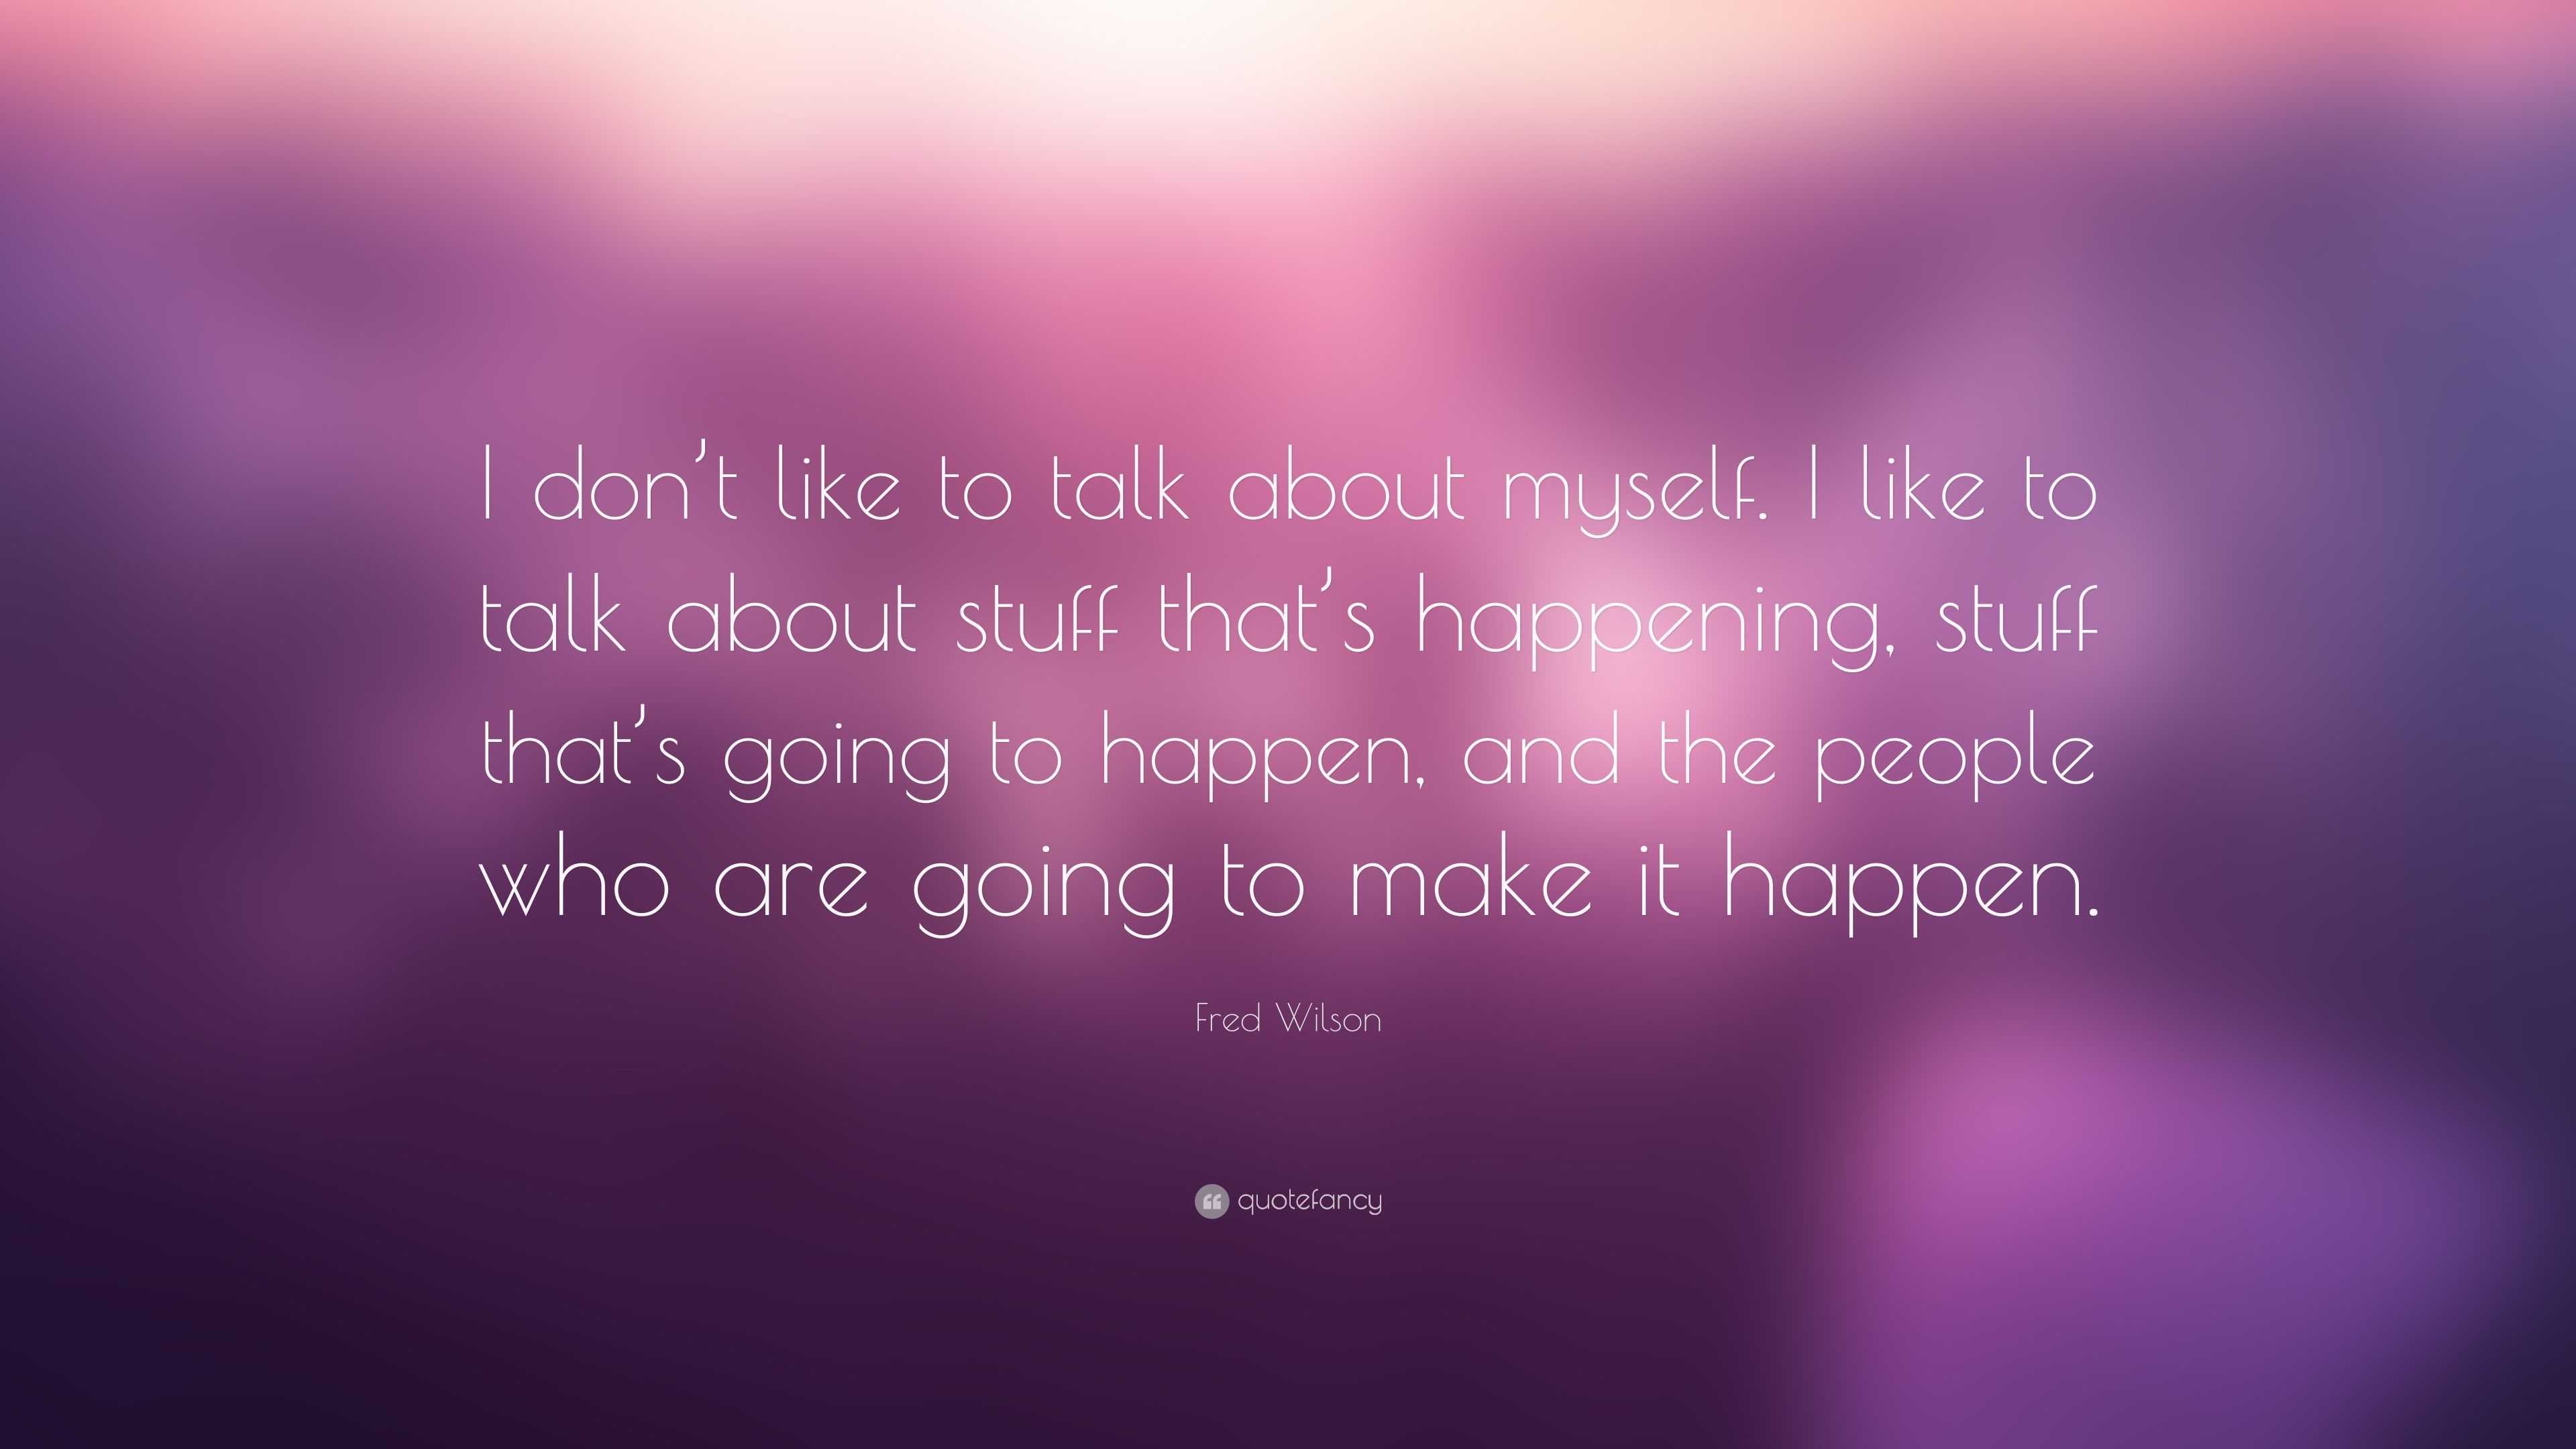 Fred Wilson Quote: “I don’t like to talk about myself. I like to talk ...